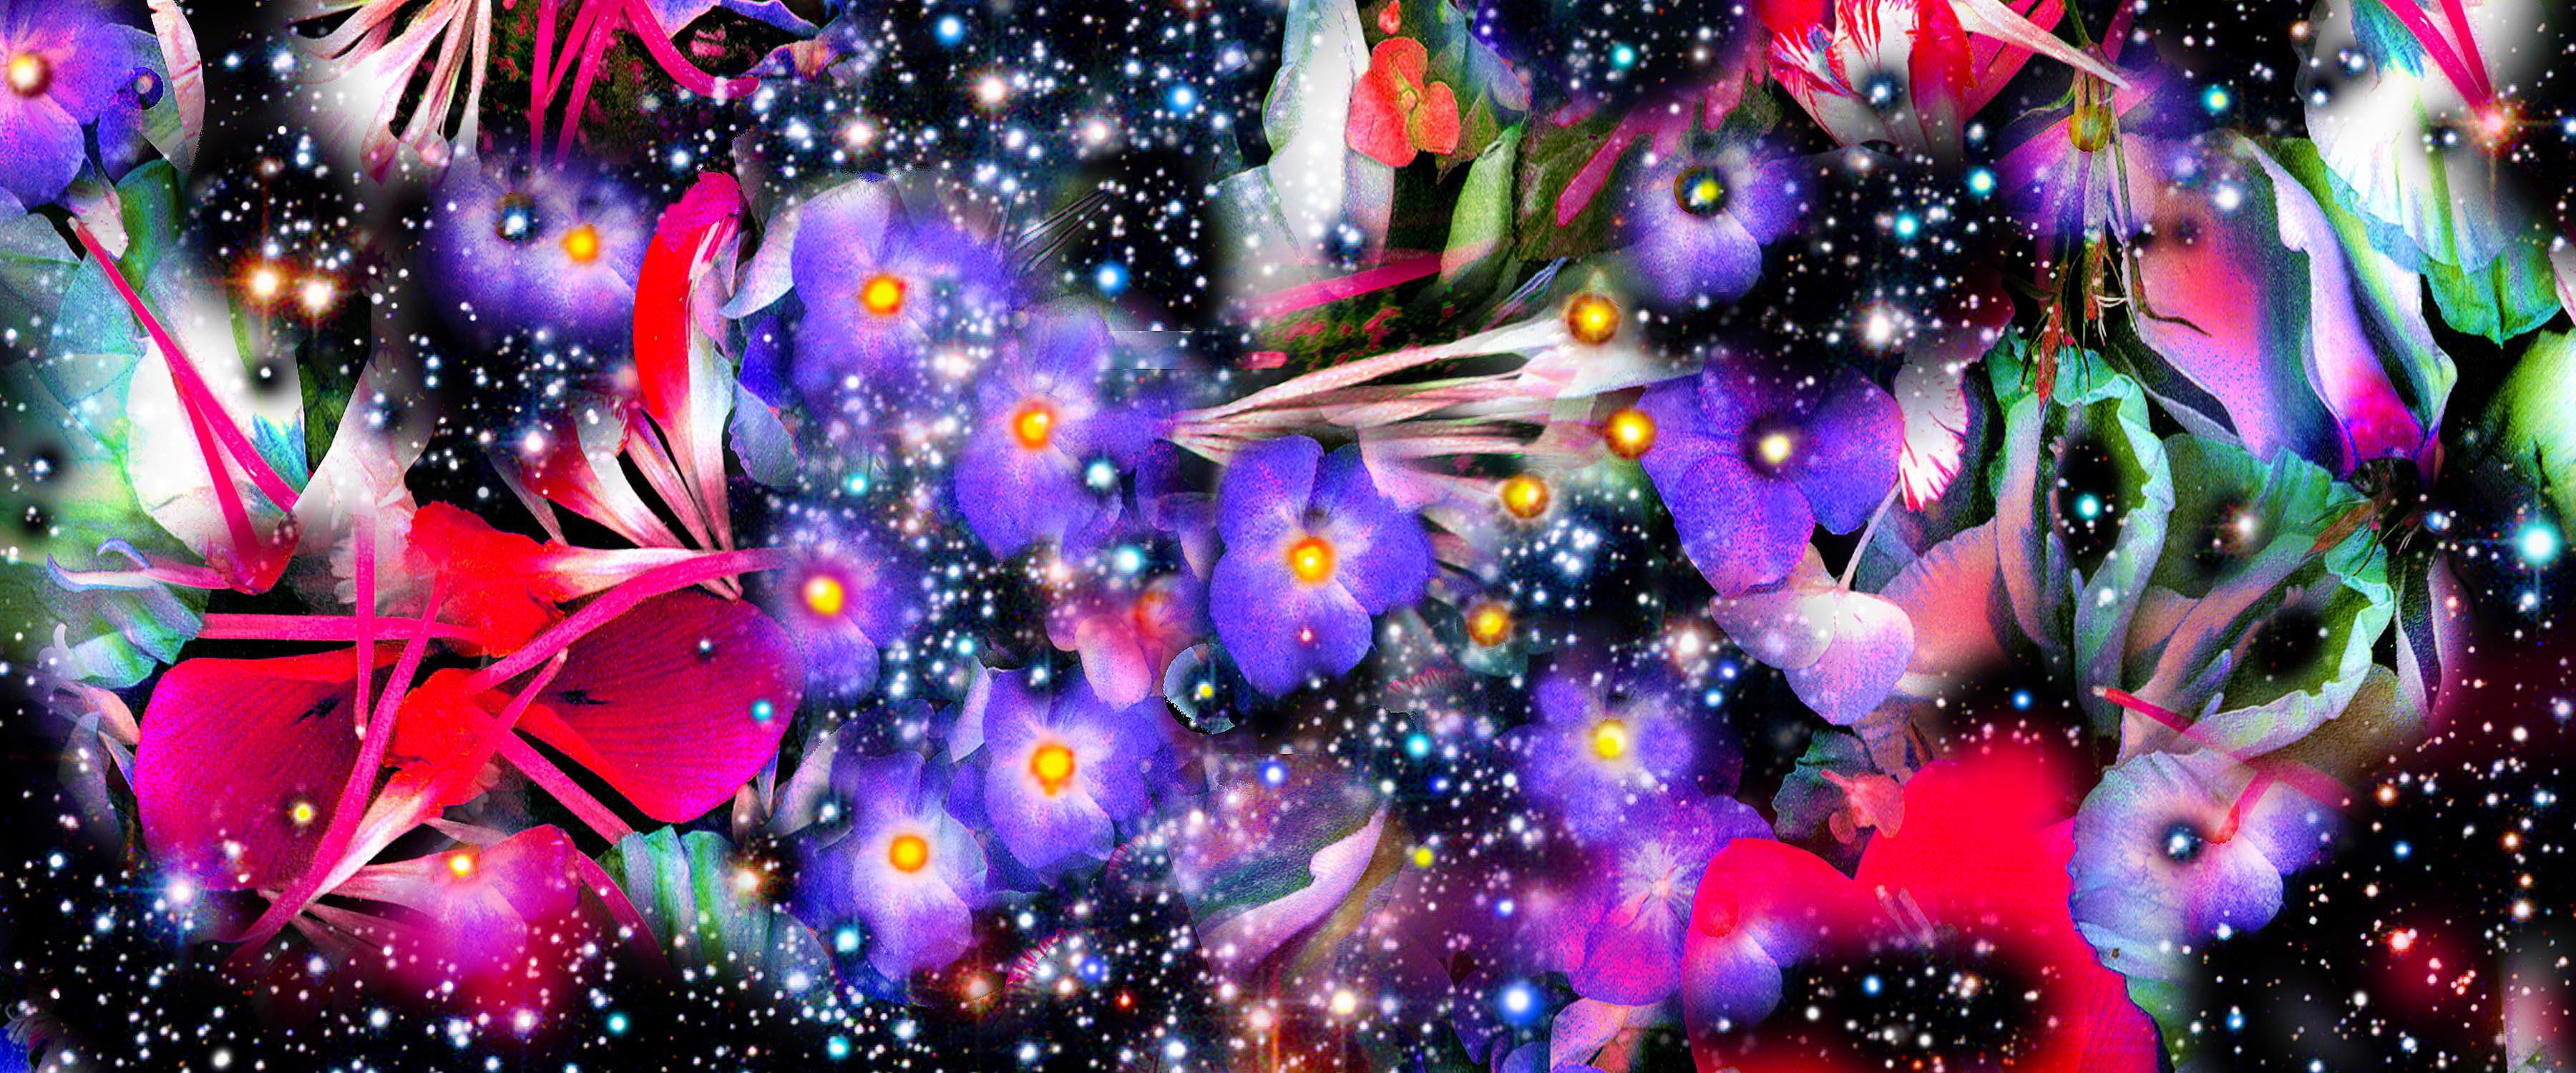 Gardens & Galaxies Purple Flowers 24"x42" colorful abstract night sky patterns 